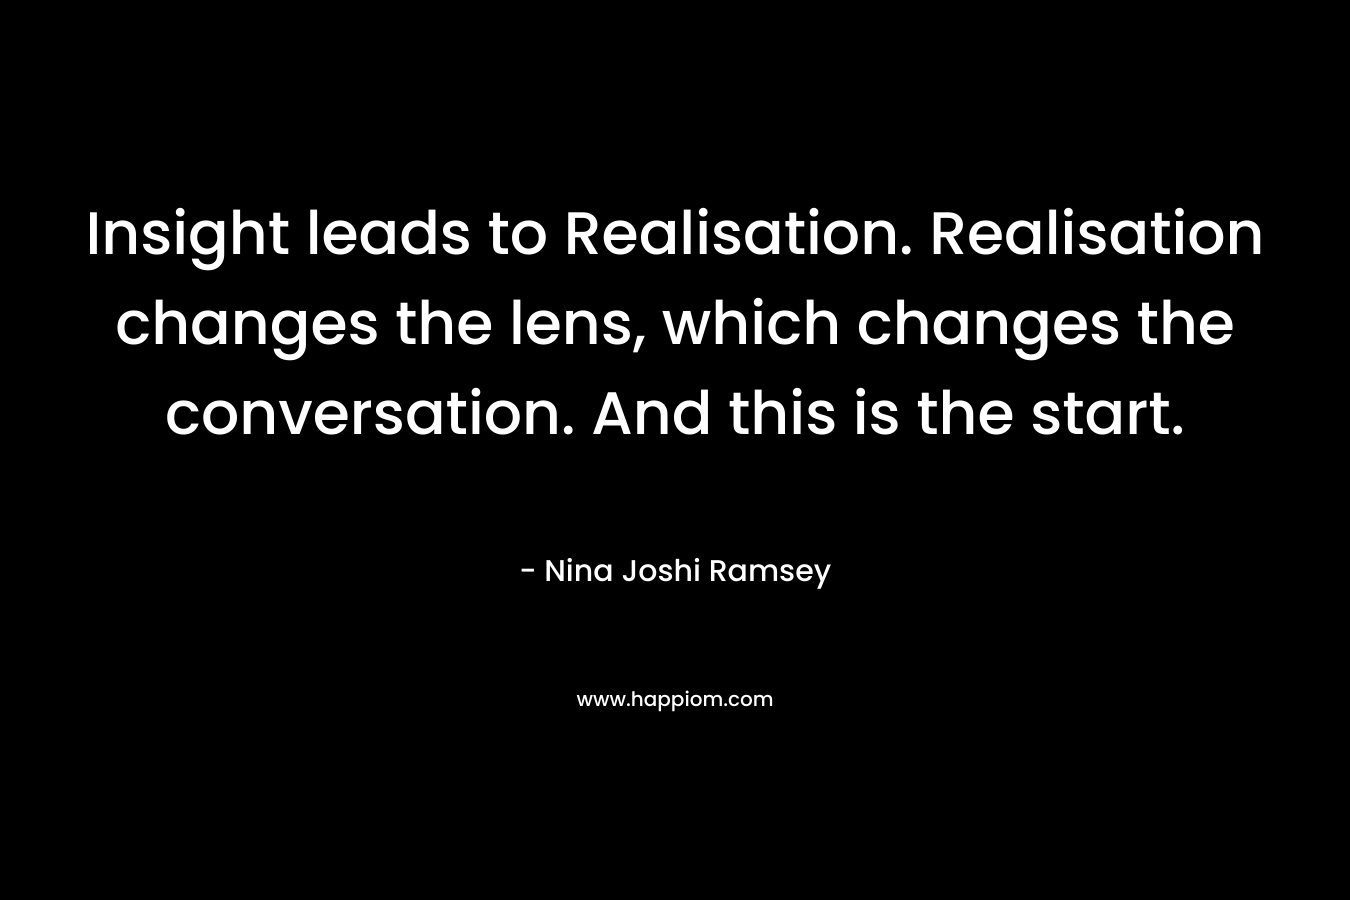 Insight leads to Realisation. Realisation changes the lens, which changes the conversation. And this is the start. – Nina Joshi Ramsey